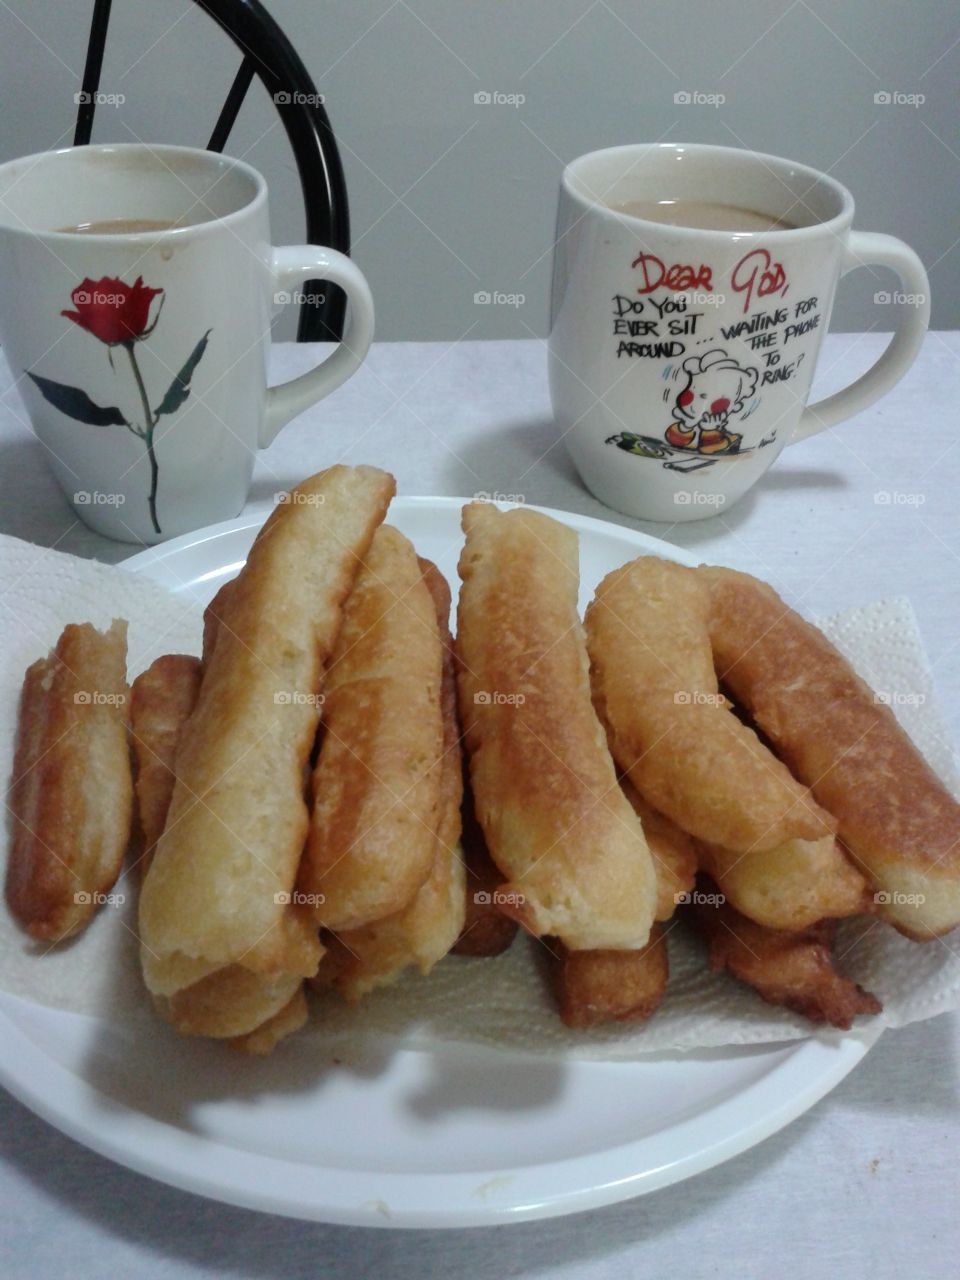 homemade Churros. I made this delicious Churros for Coffee time